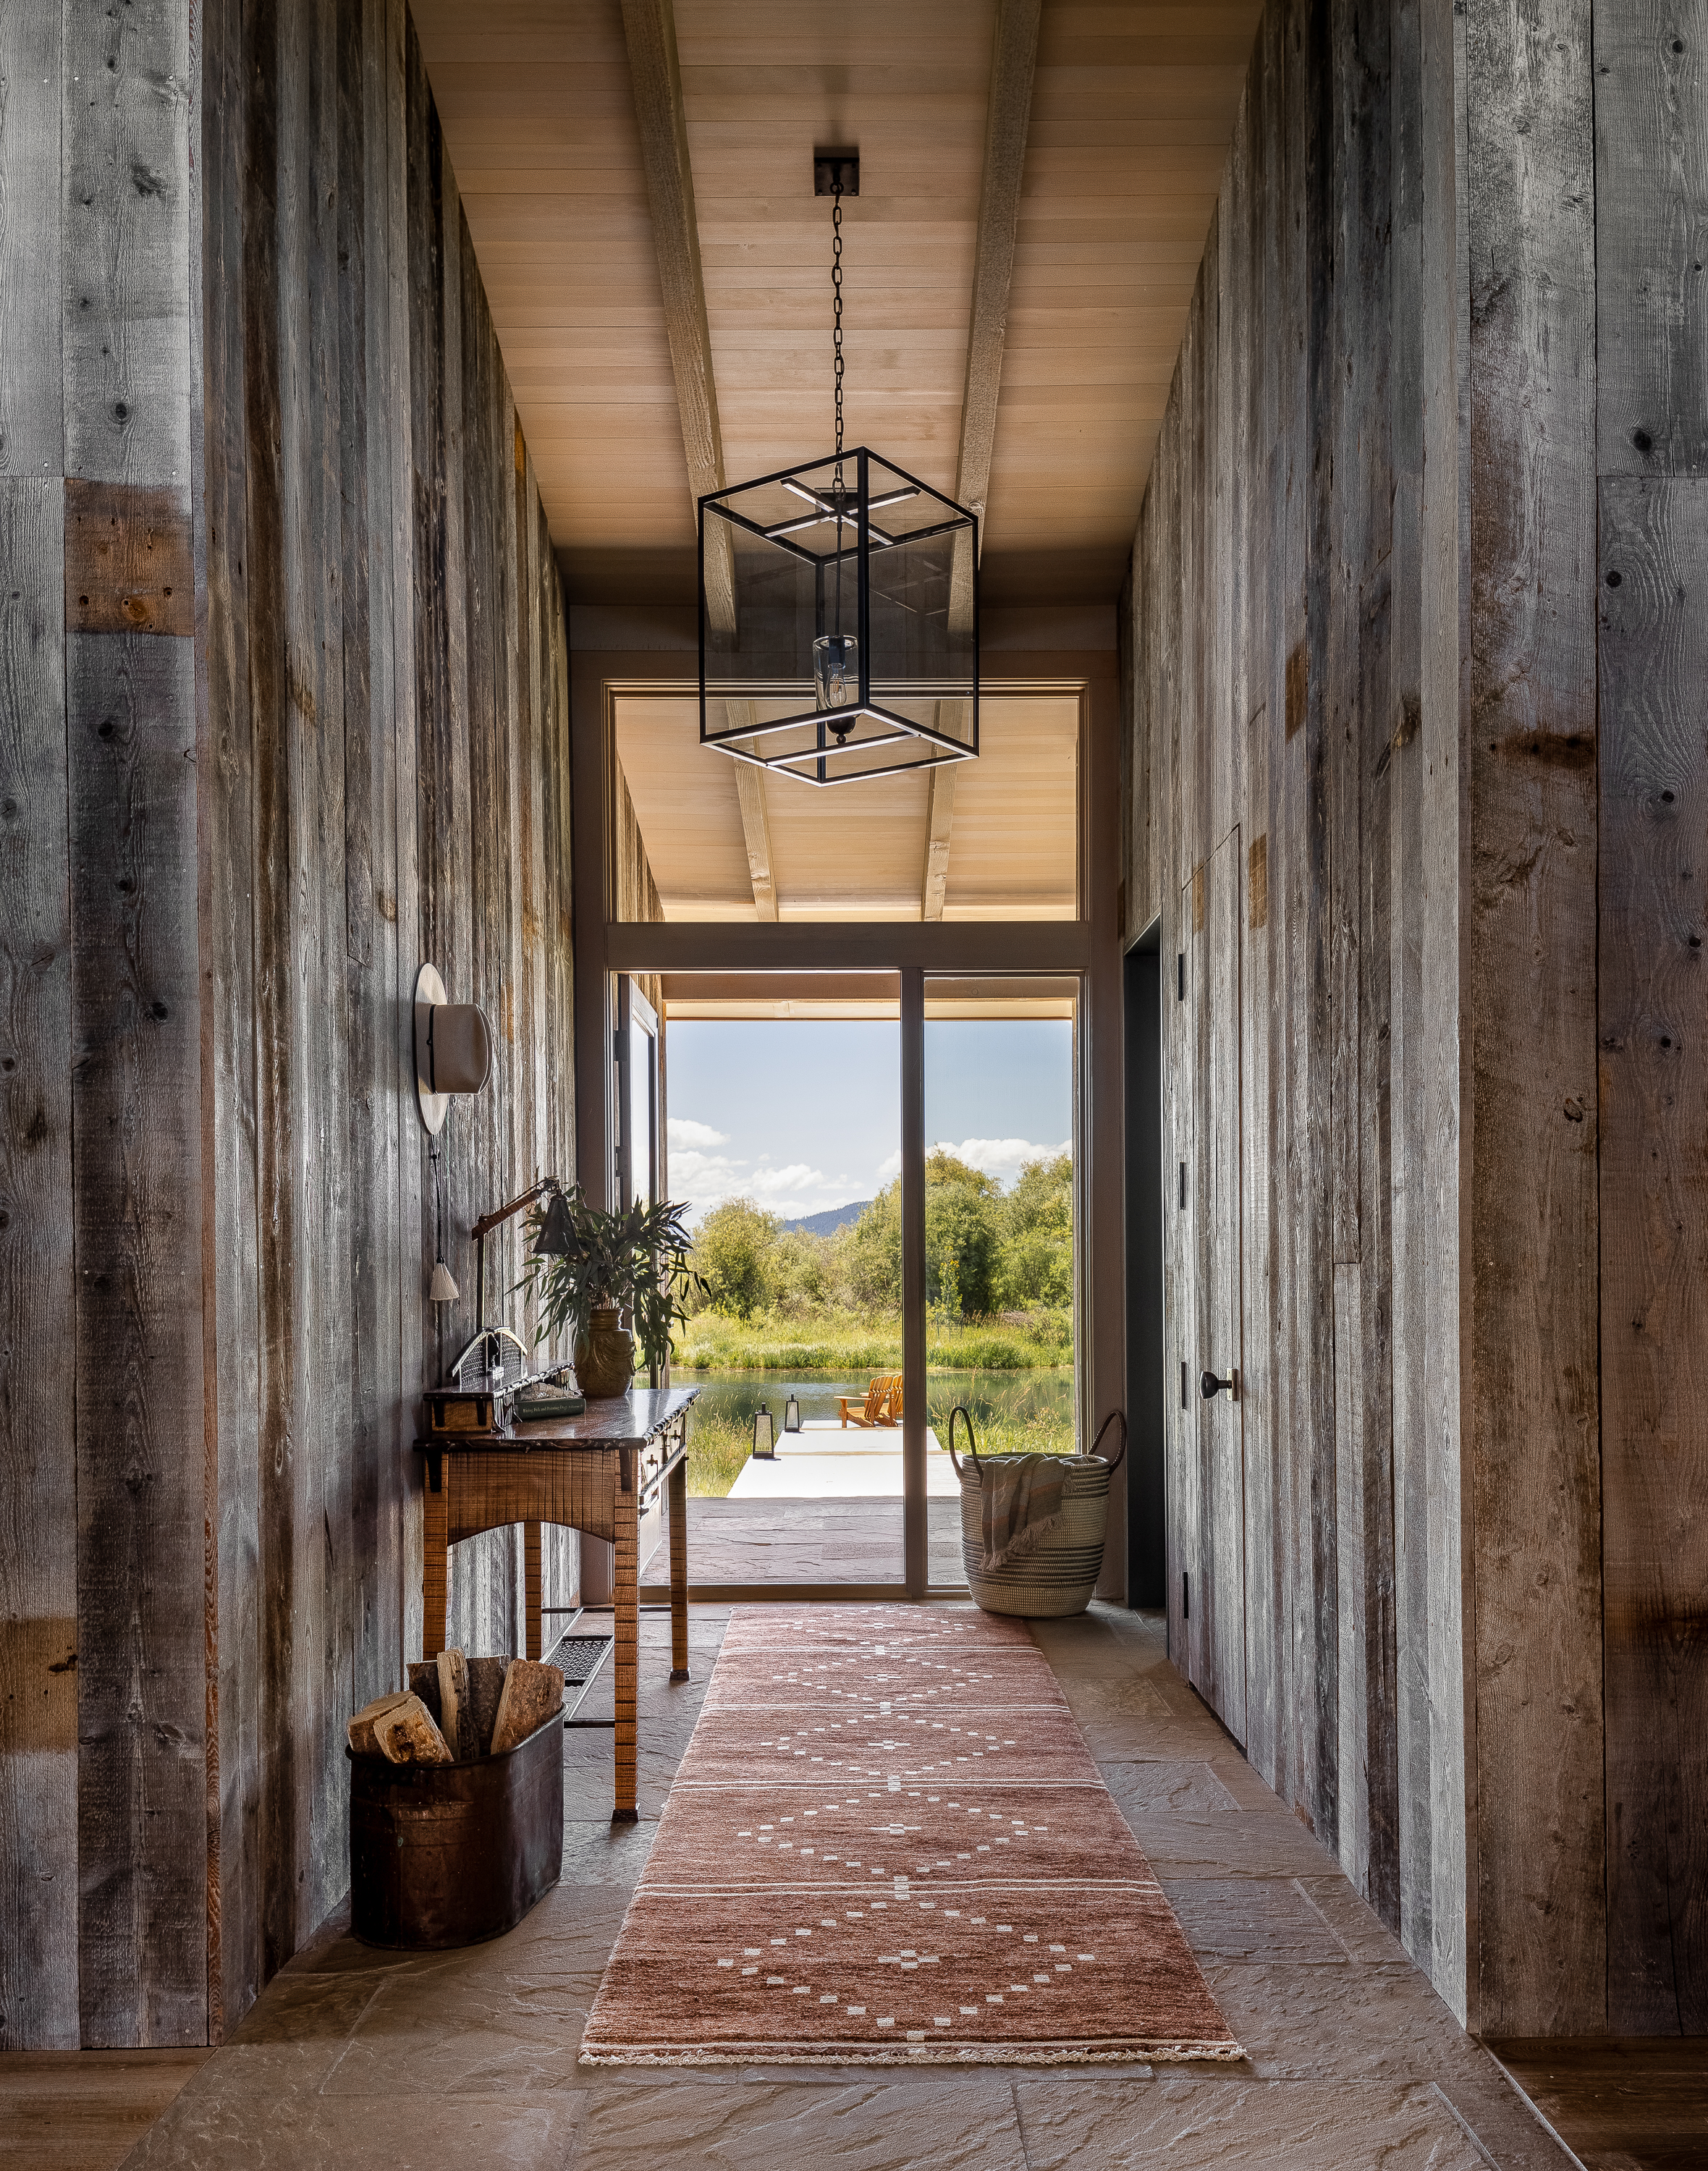 Rustic home interior with reclaimed wood siding, vintage furniture and rugs, and a large-scale metal cube chandelier. The axial hallway leads straight to the lake, offering picturesque views.